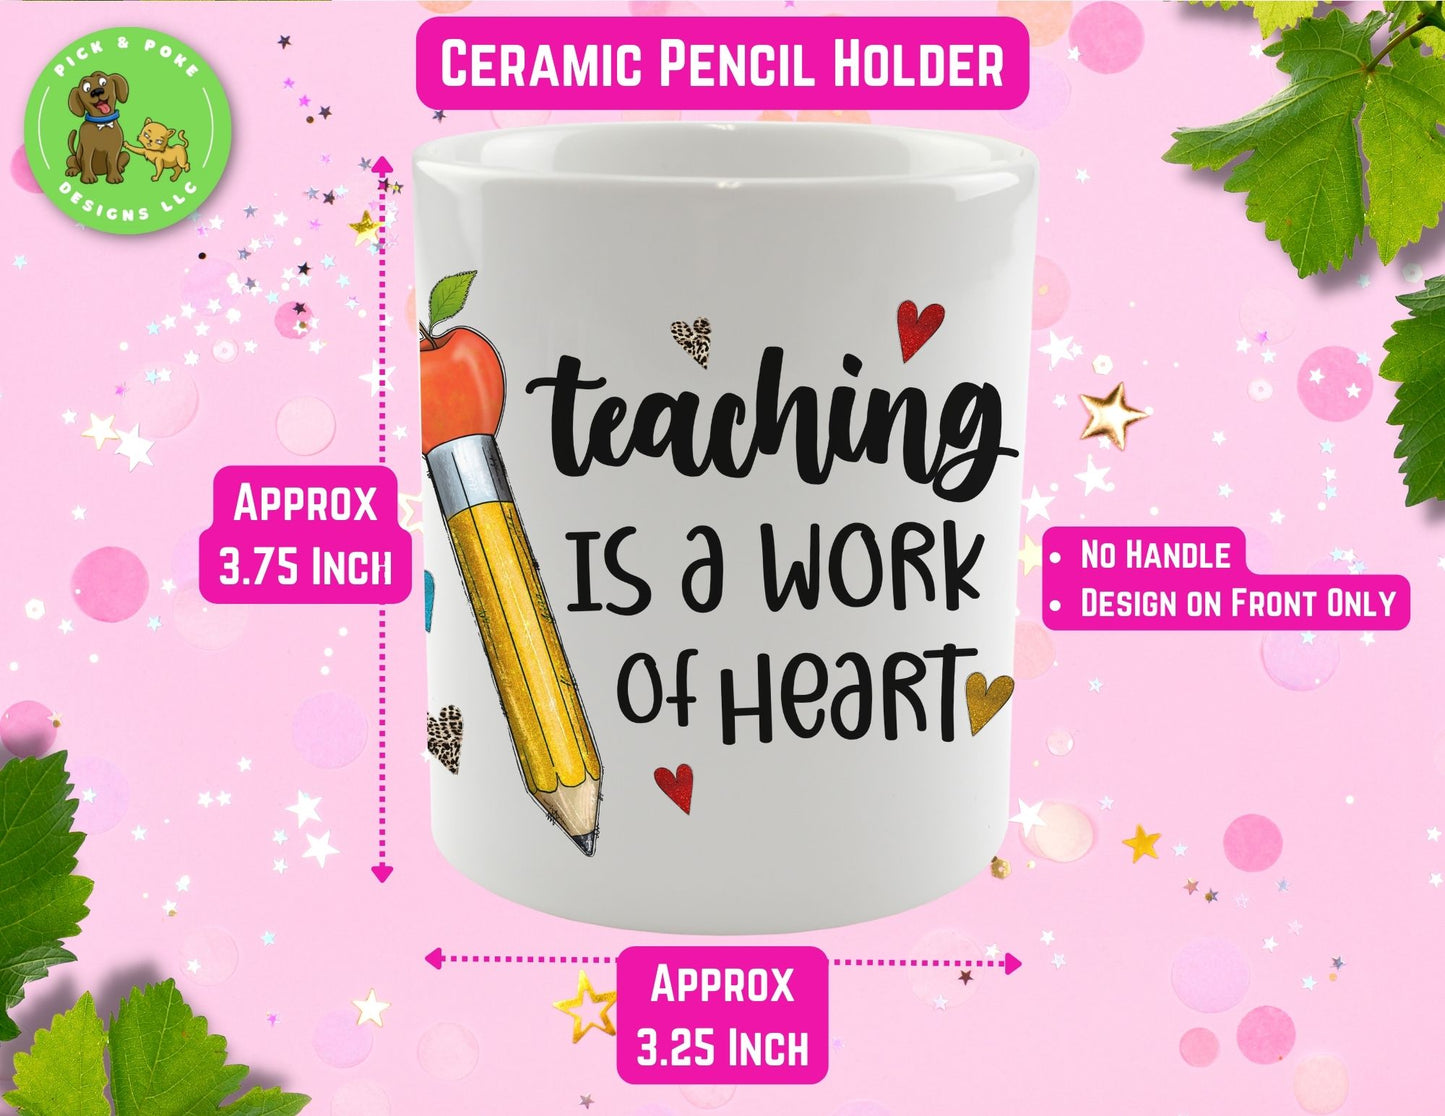 Teaching is a Work of Heart ceramic pencil holder is 3.75 inches tall and has a circumference of 10.5 inches. 